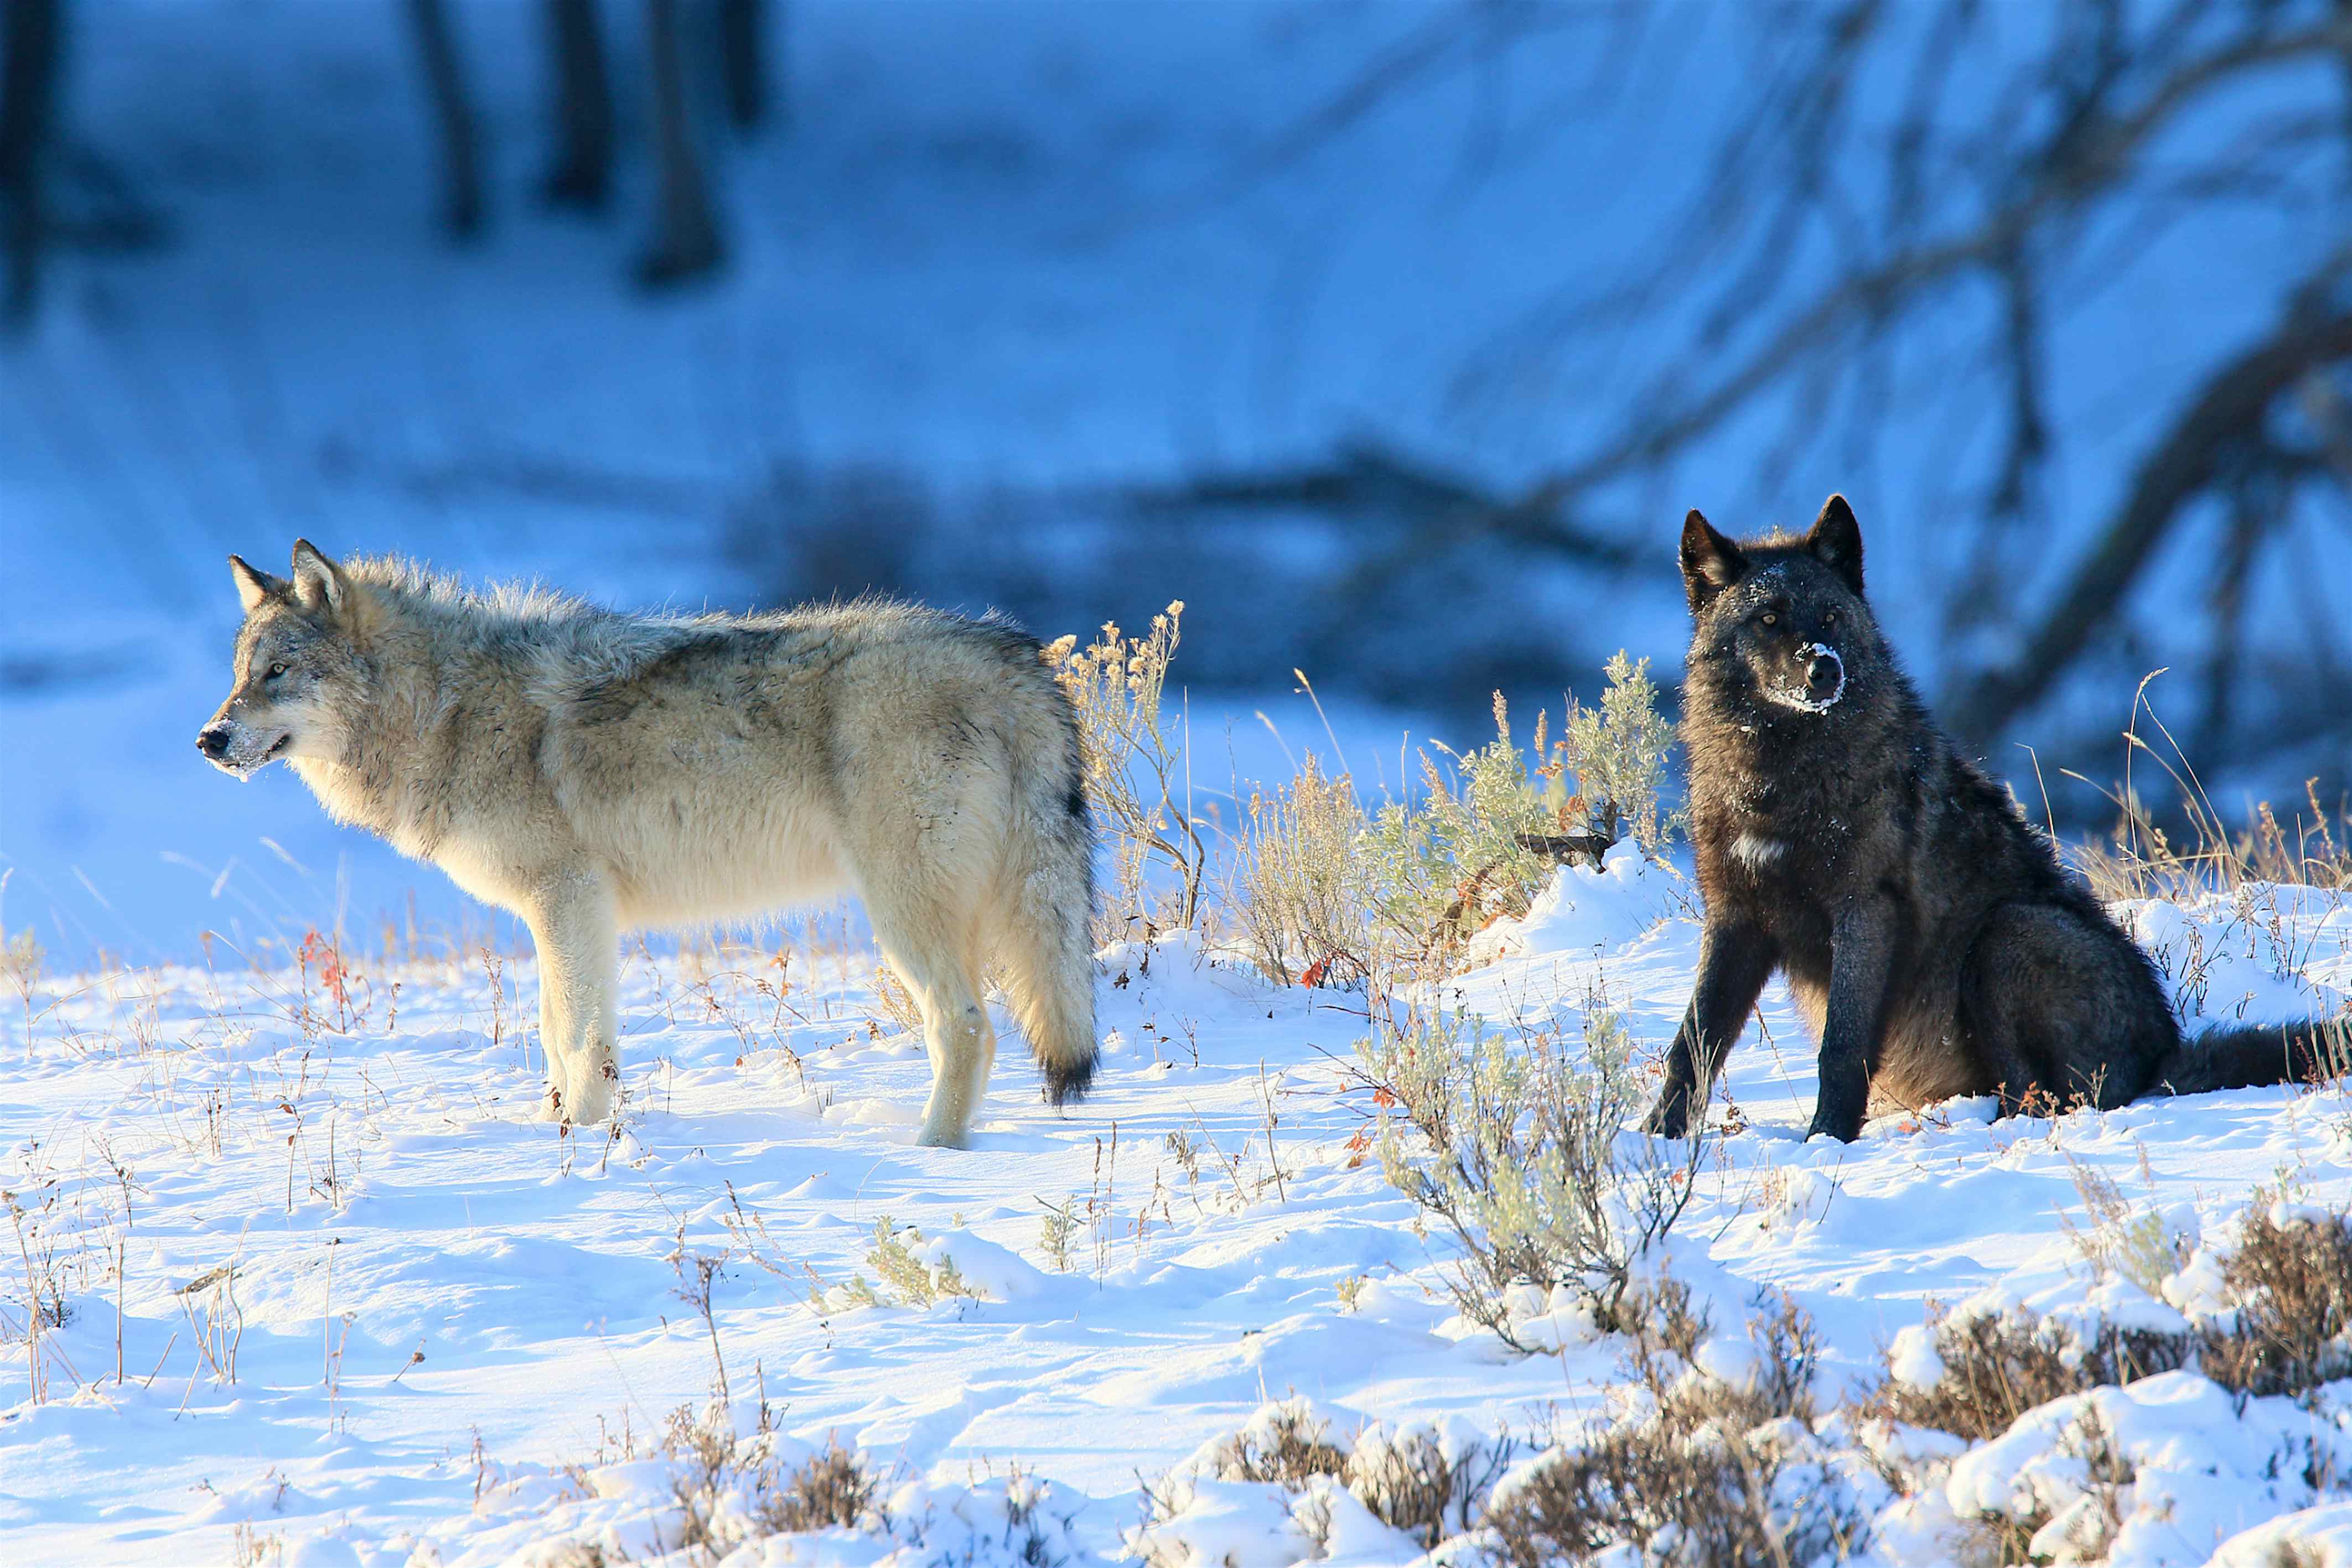 A historic vote in Colorado will bring gray wolves back